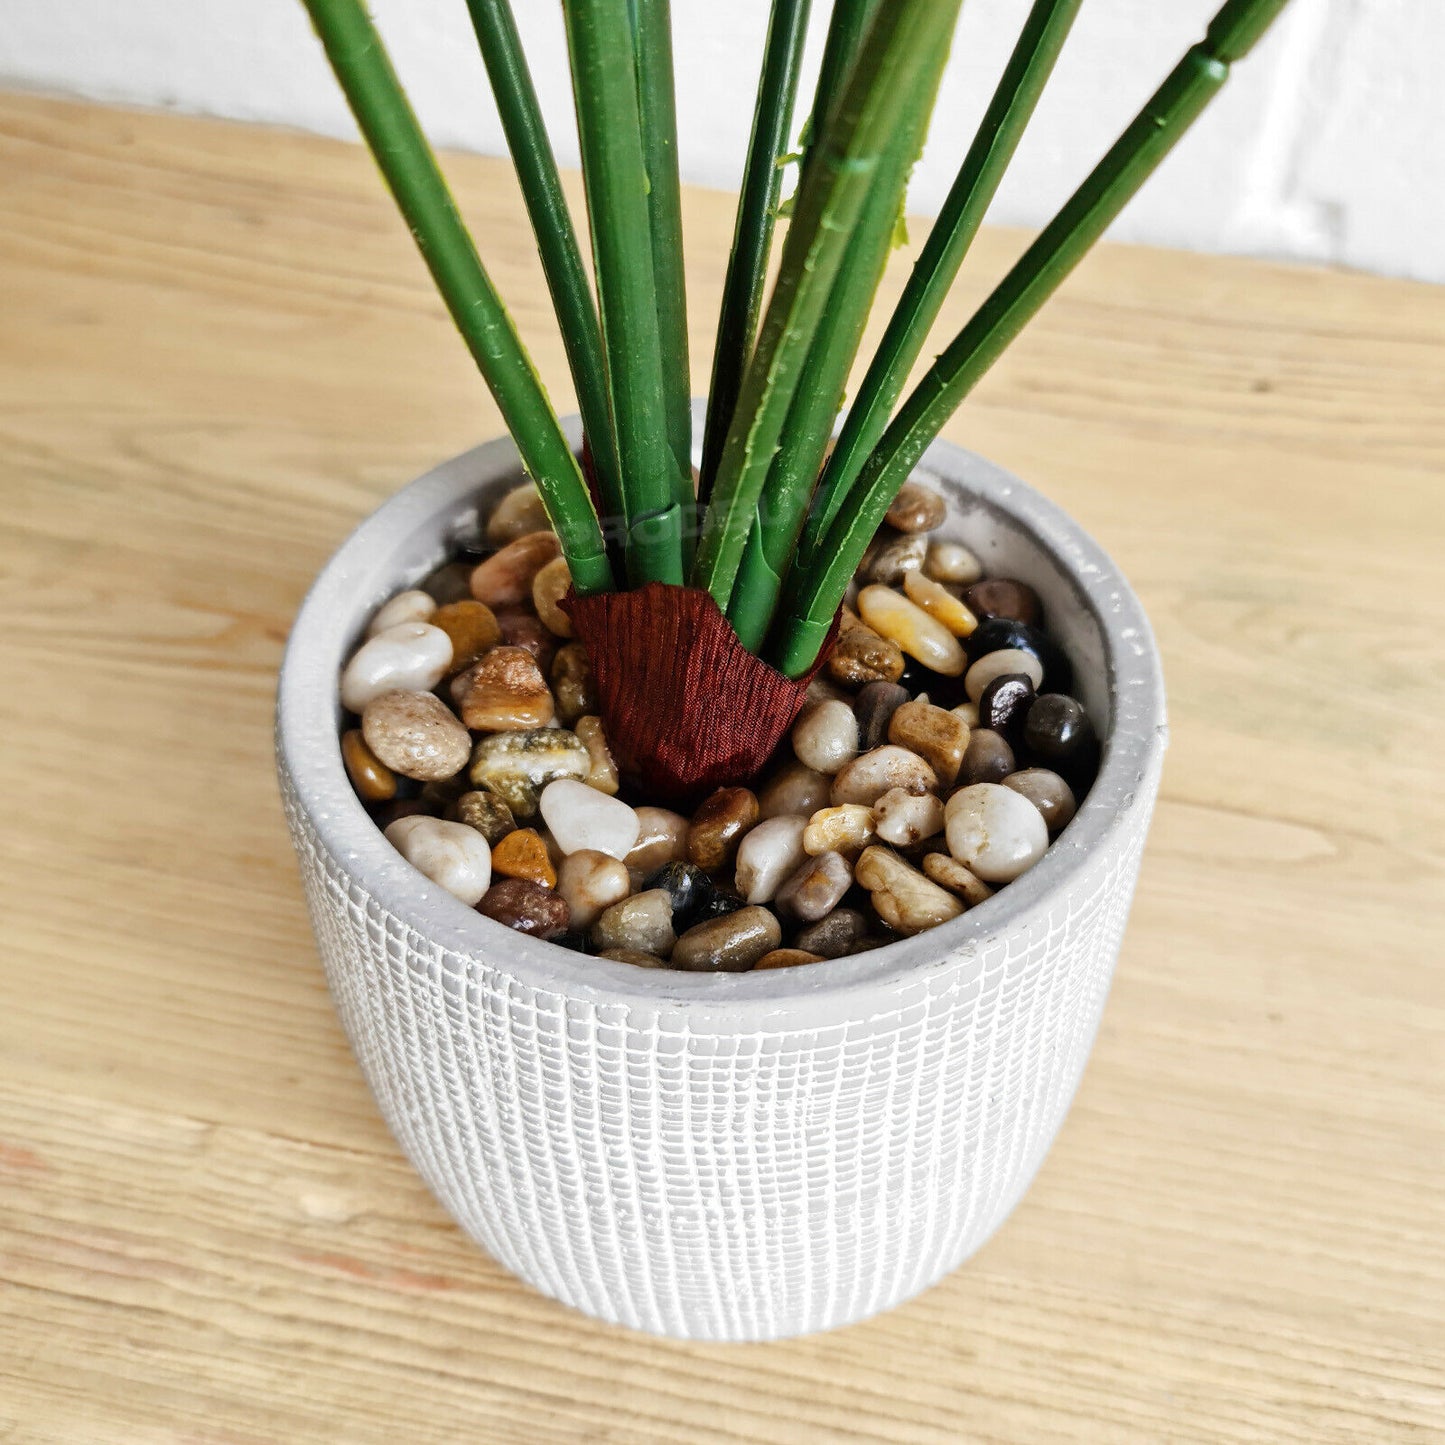 Large 50cm Artificial Cheese Leaf Indoor Plant & Pot